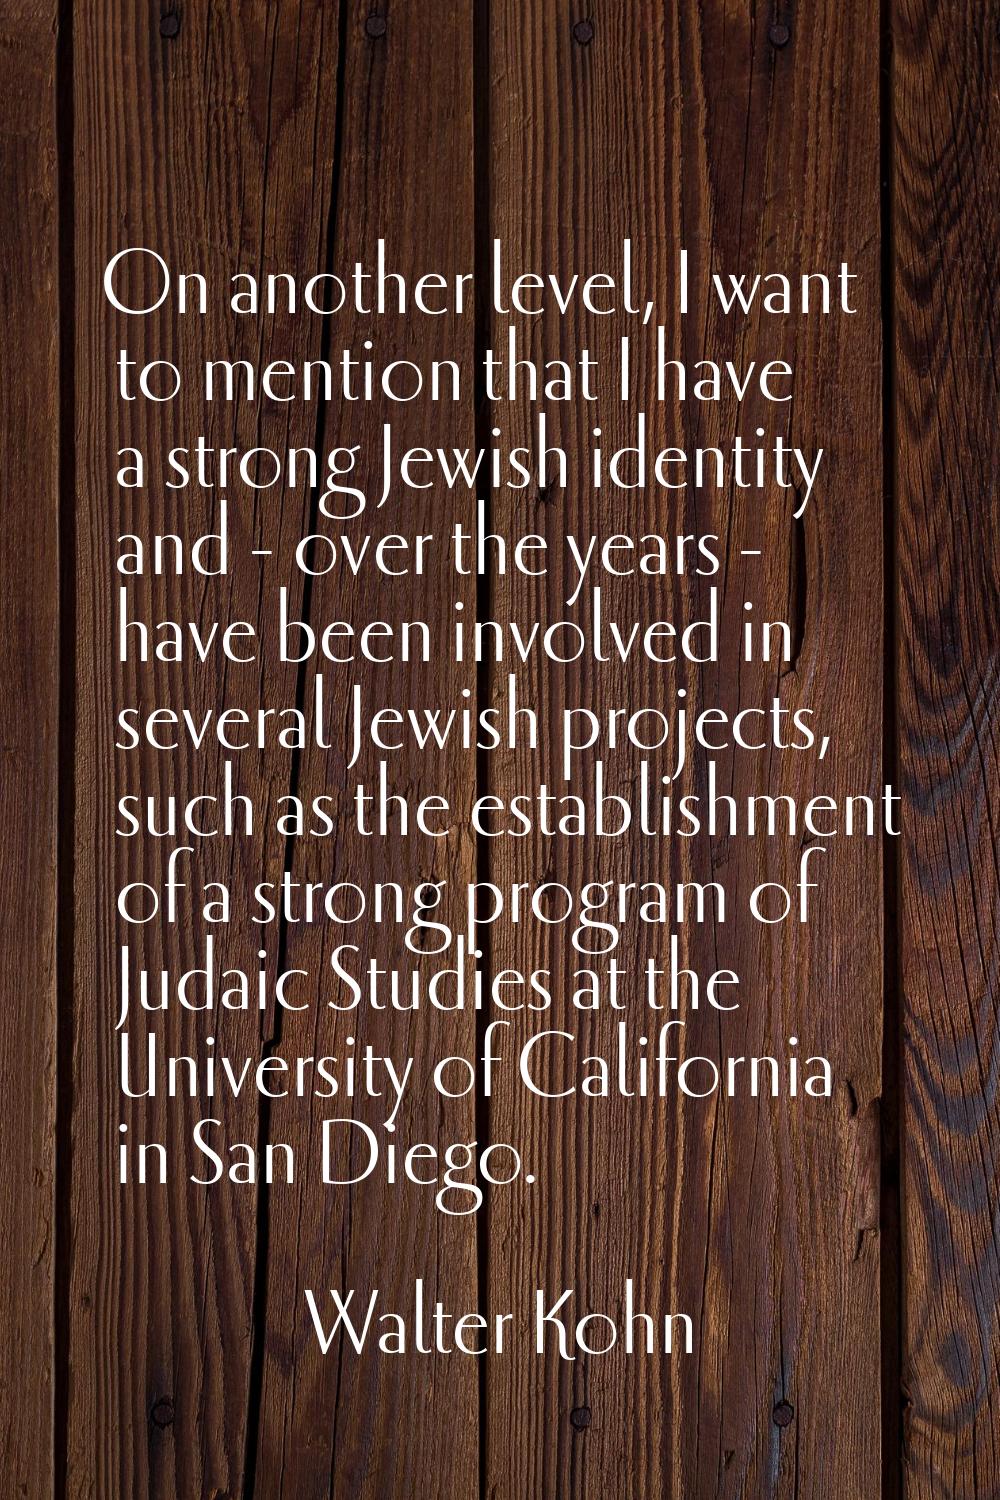 On another level, I want to mention that I have a strong Jewish identity and - over the years - hav